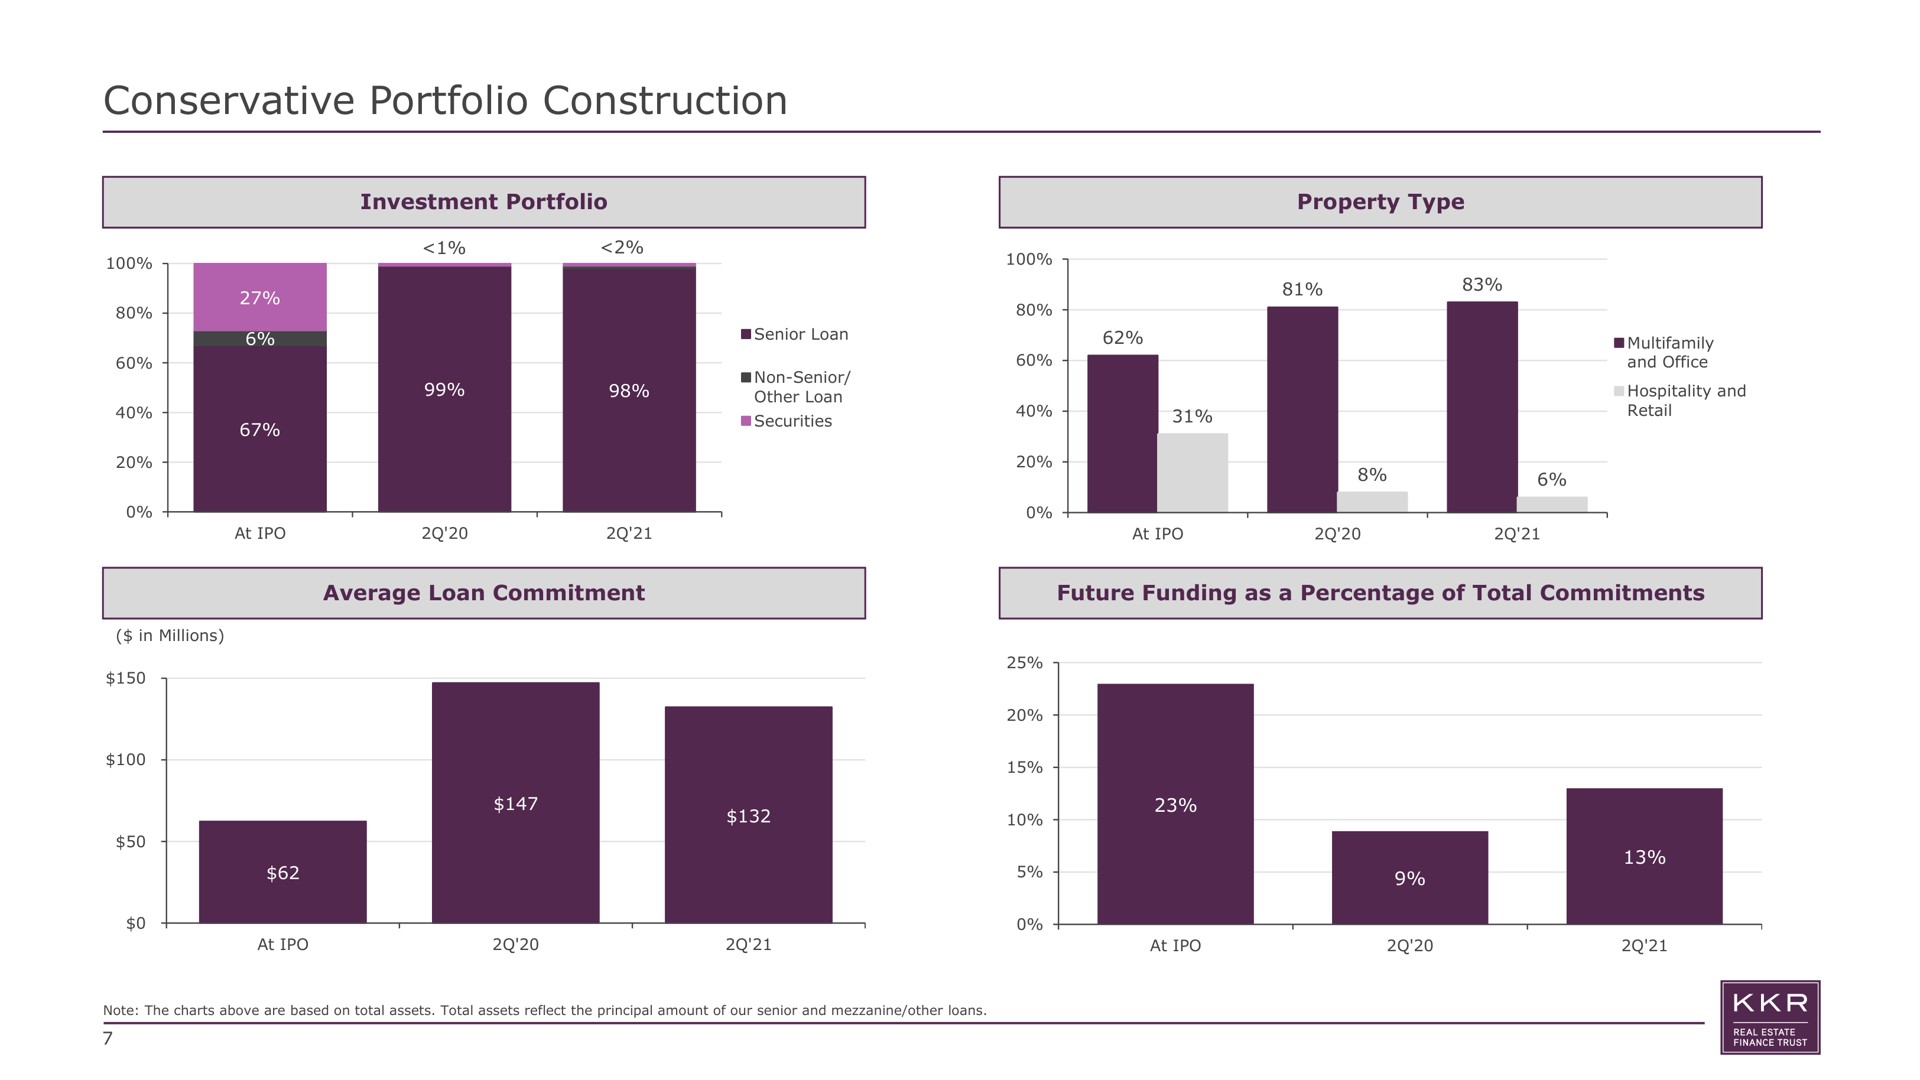 conservative portfolio construction investment property type average loan commitment future funding as a percentage of total commitments | KKR Real Estate Finance Trust